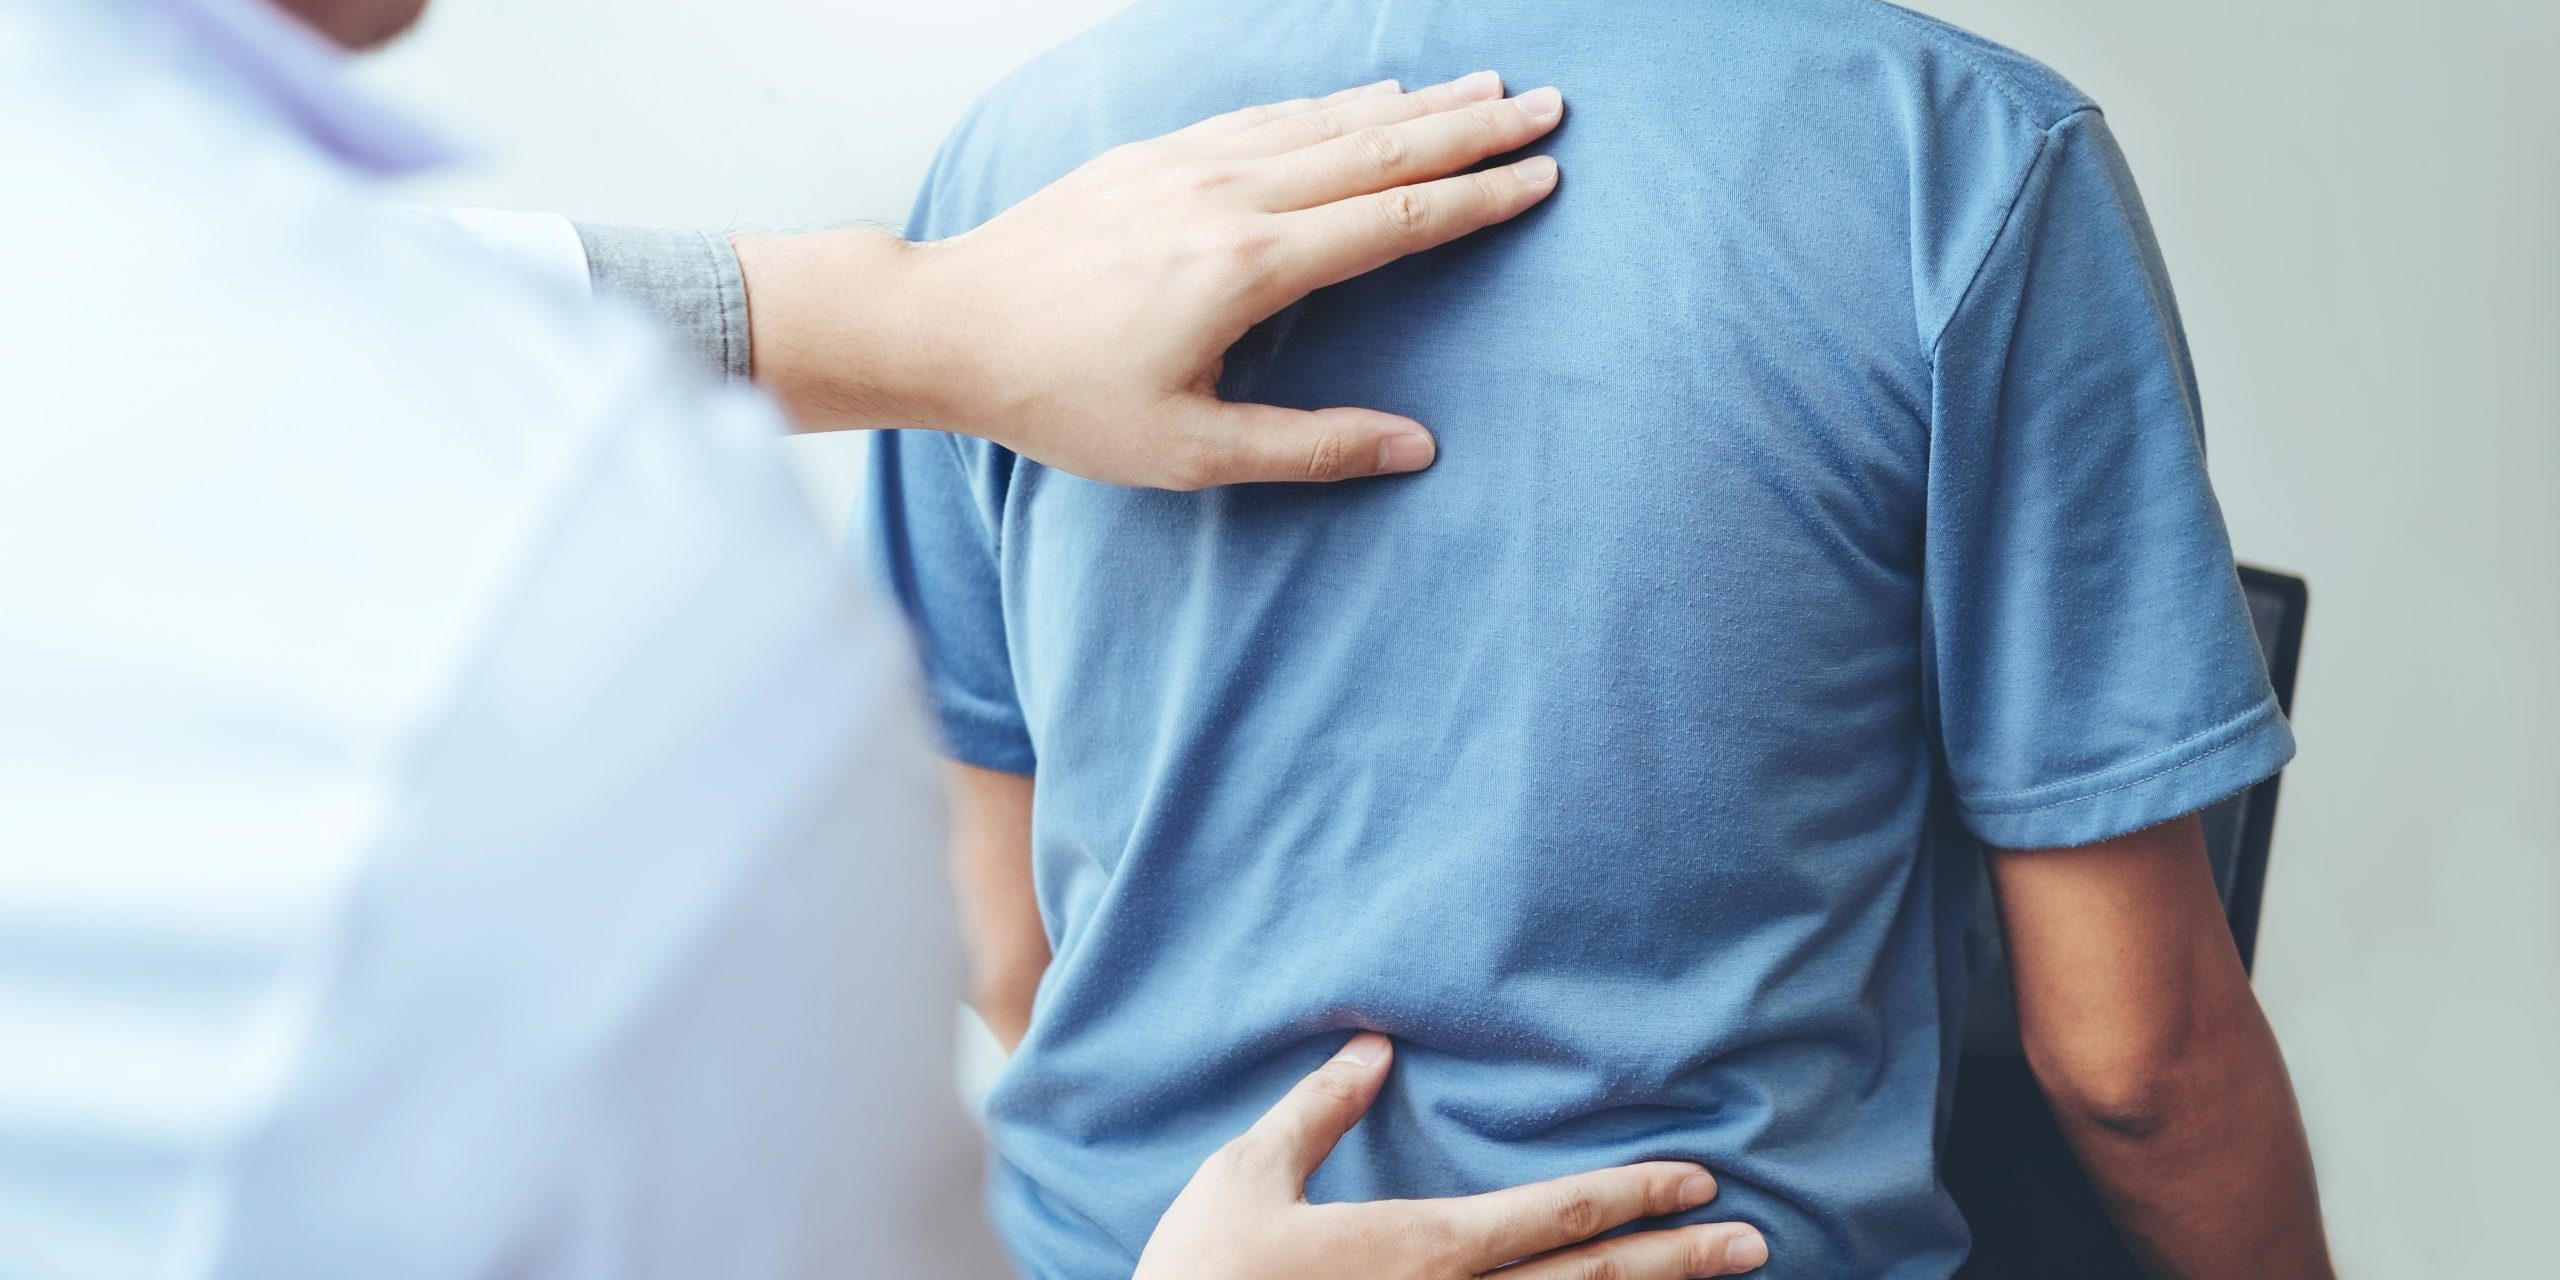 Doctor consulting patient with back problems